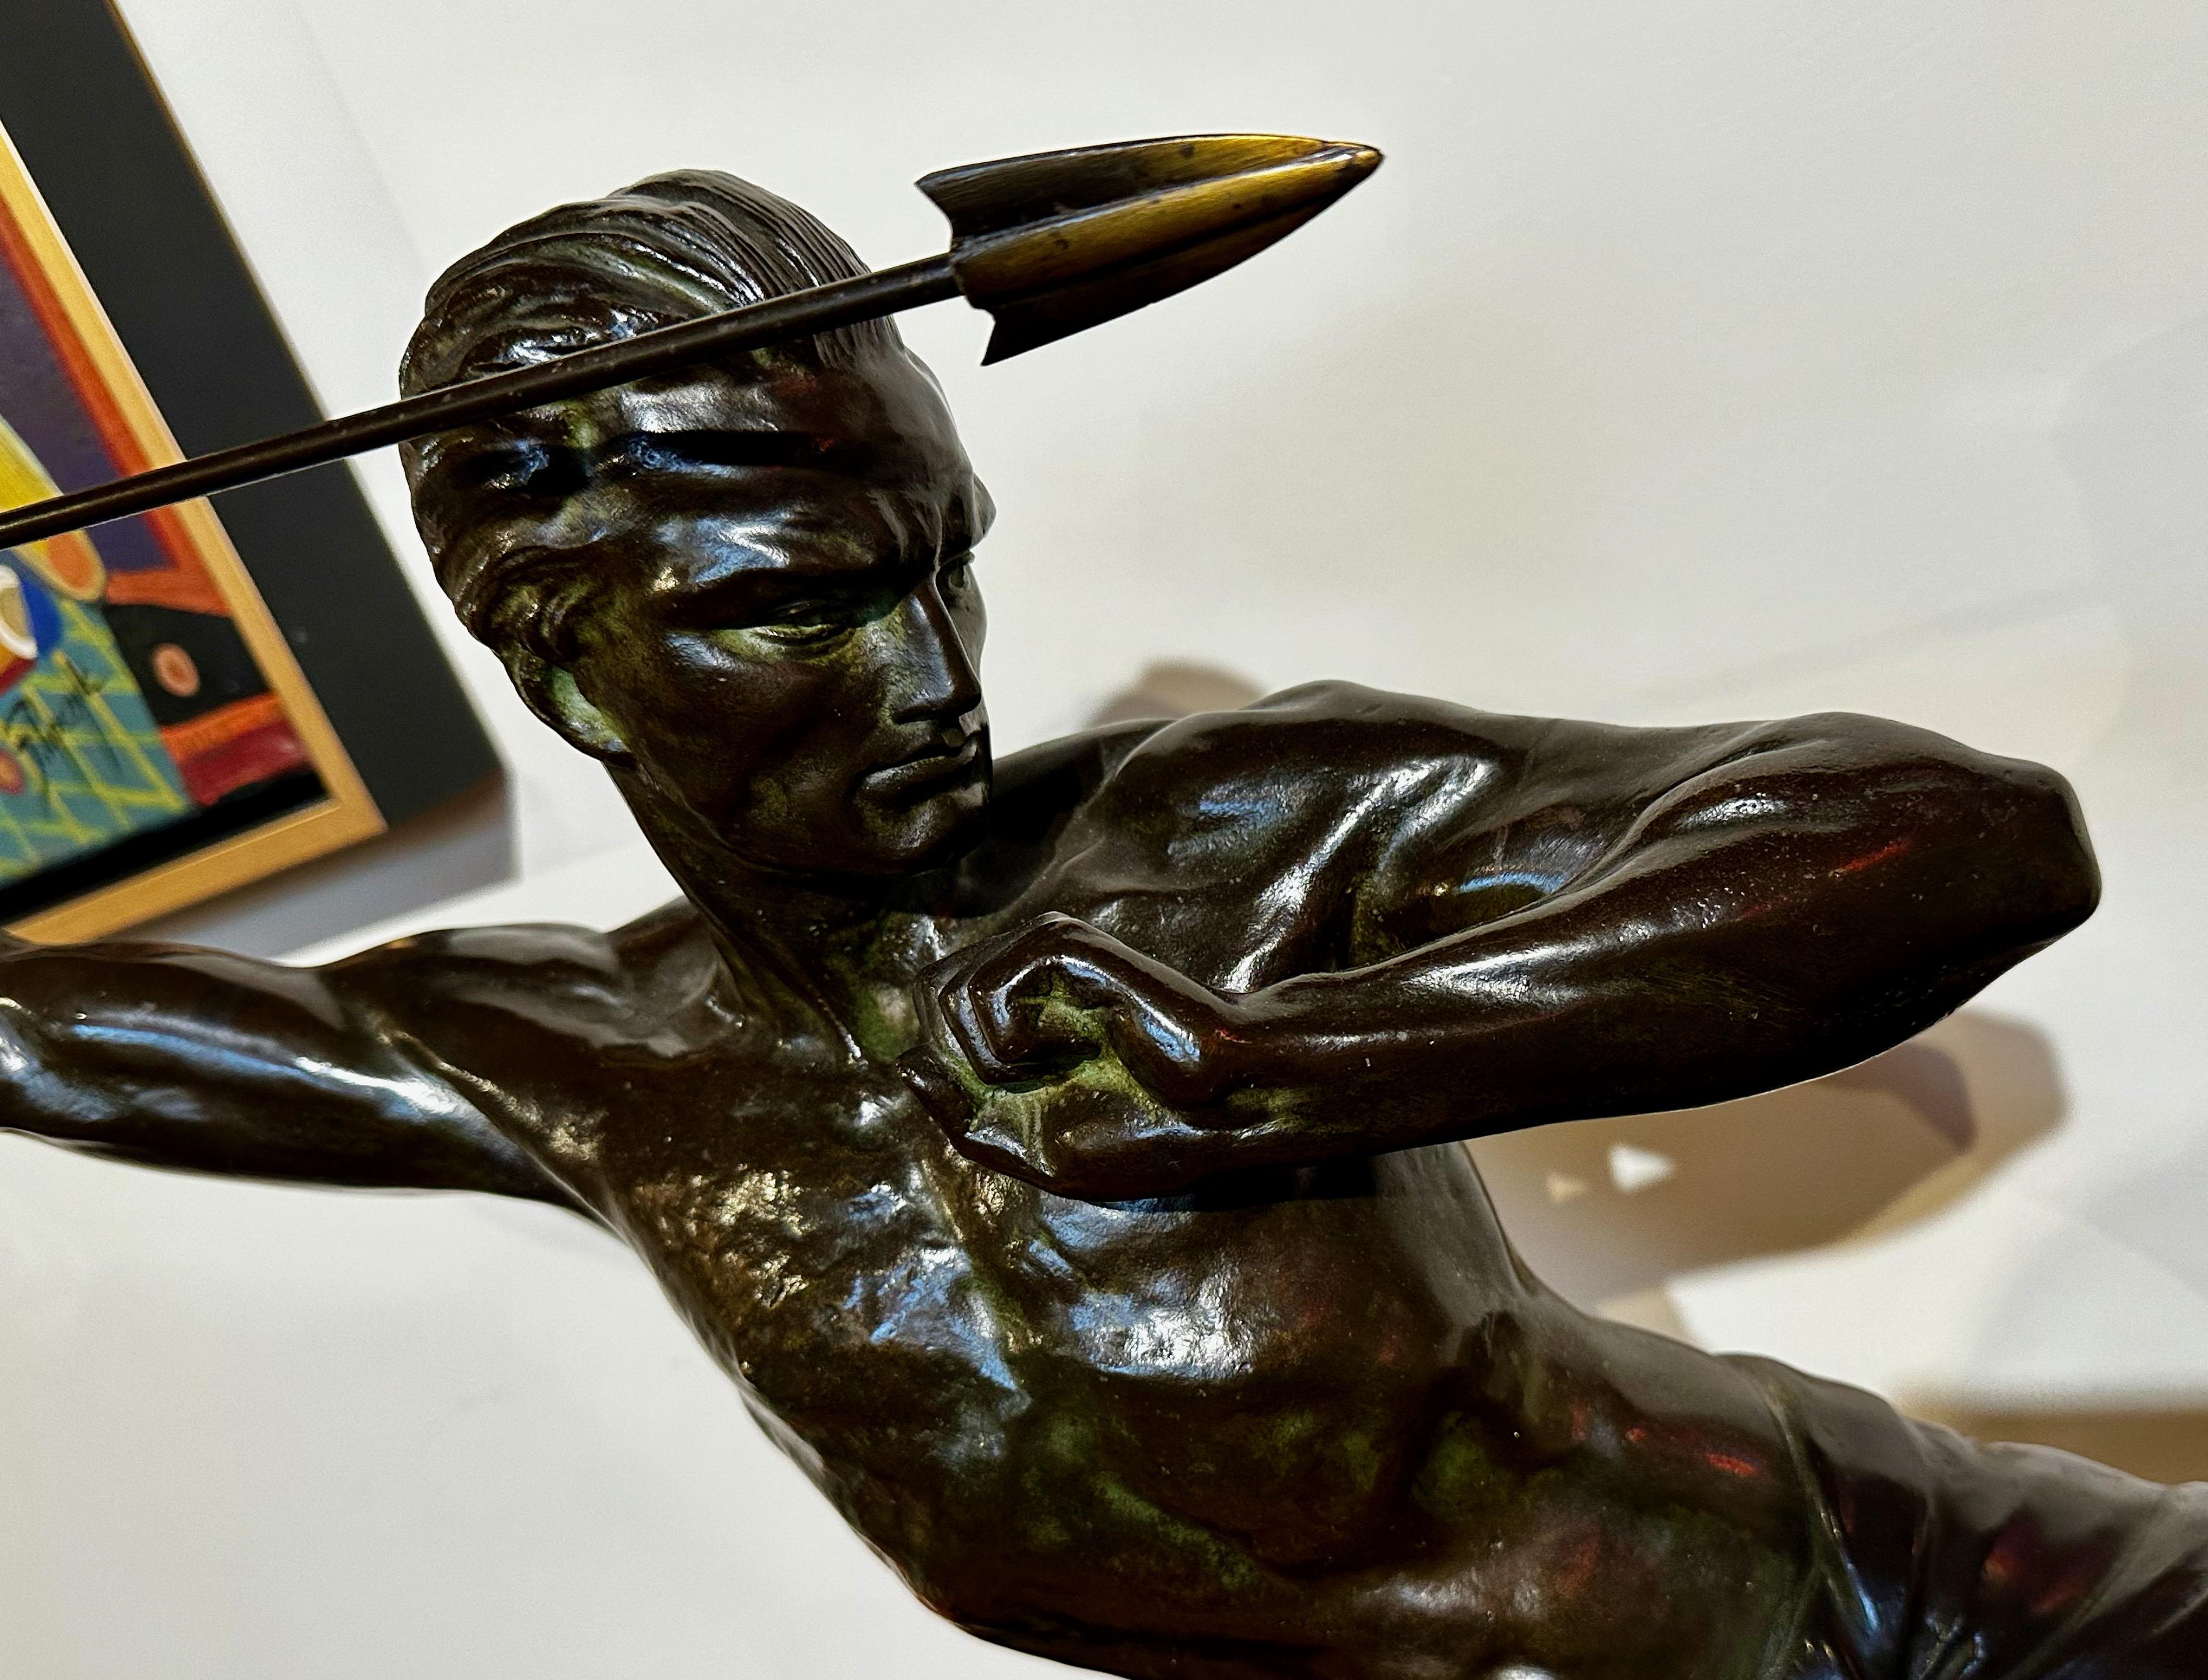 Mid-20th Century Art Deco Bronze Warrior Javelin Thrower by P. Hugonnet French 1930s For Sale